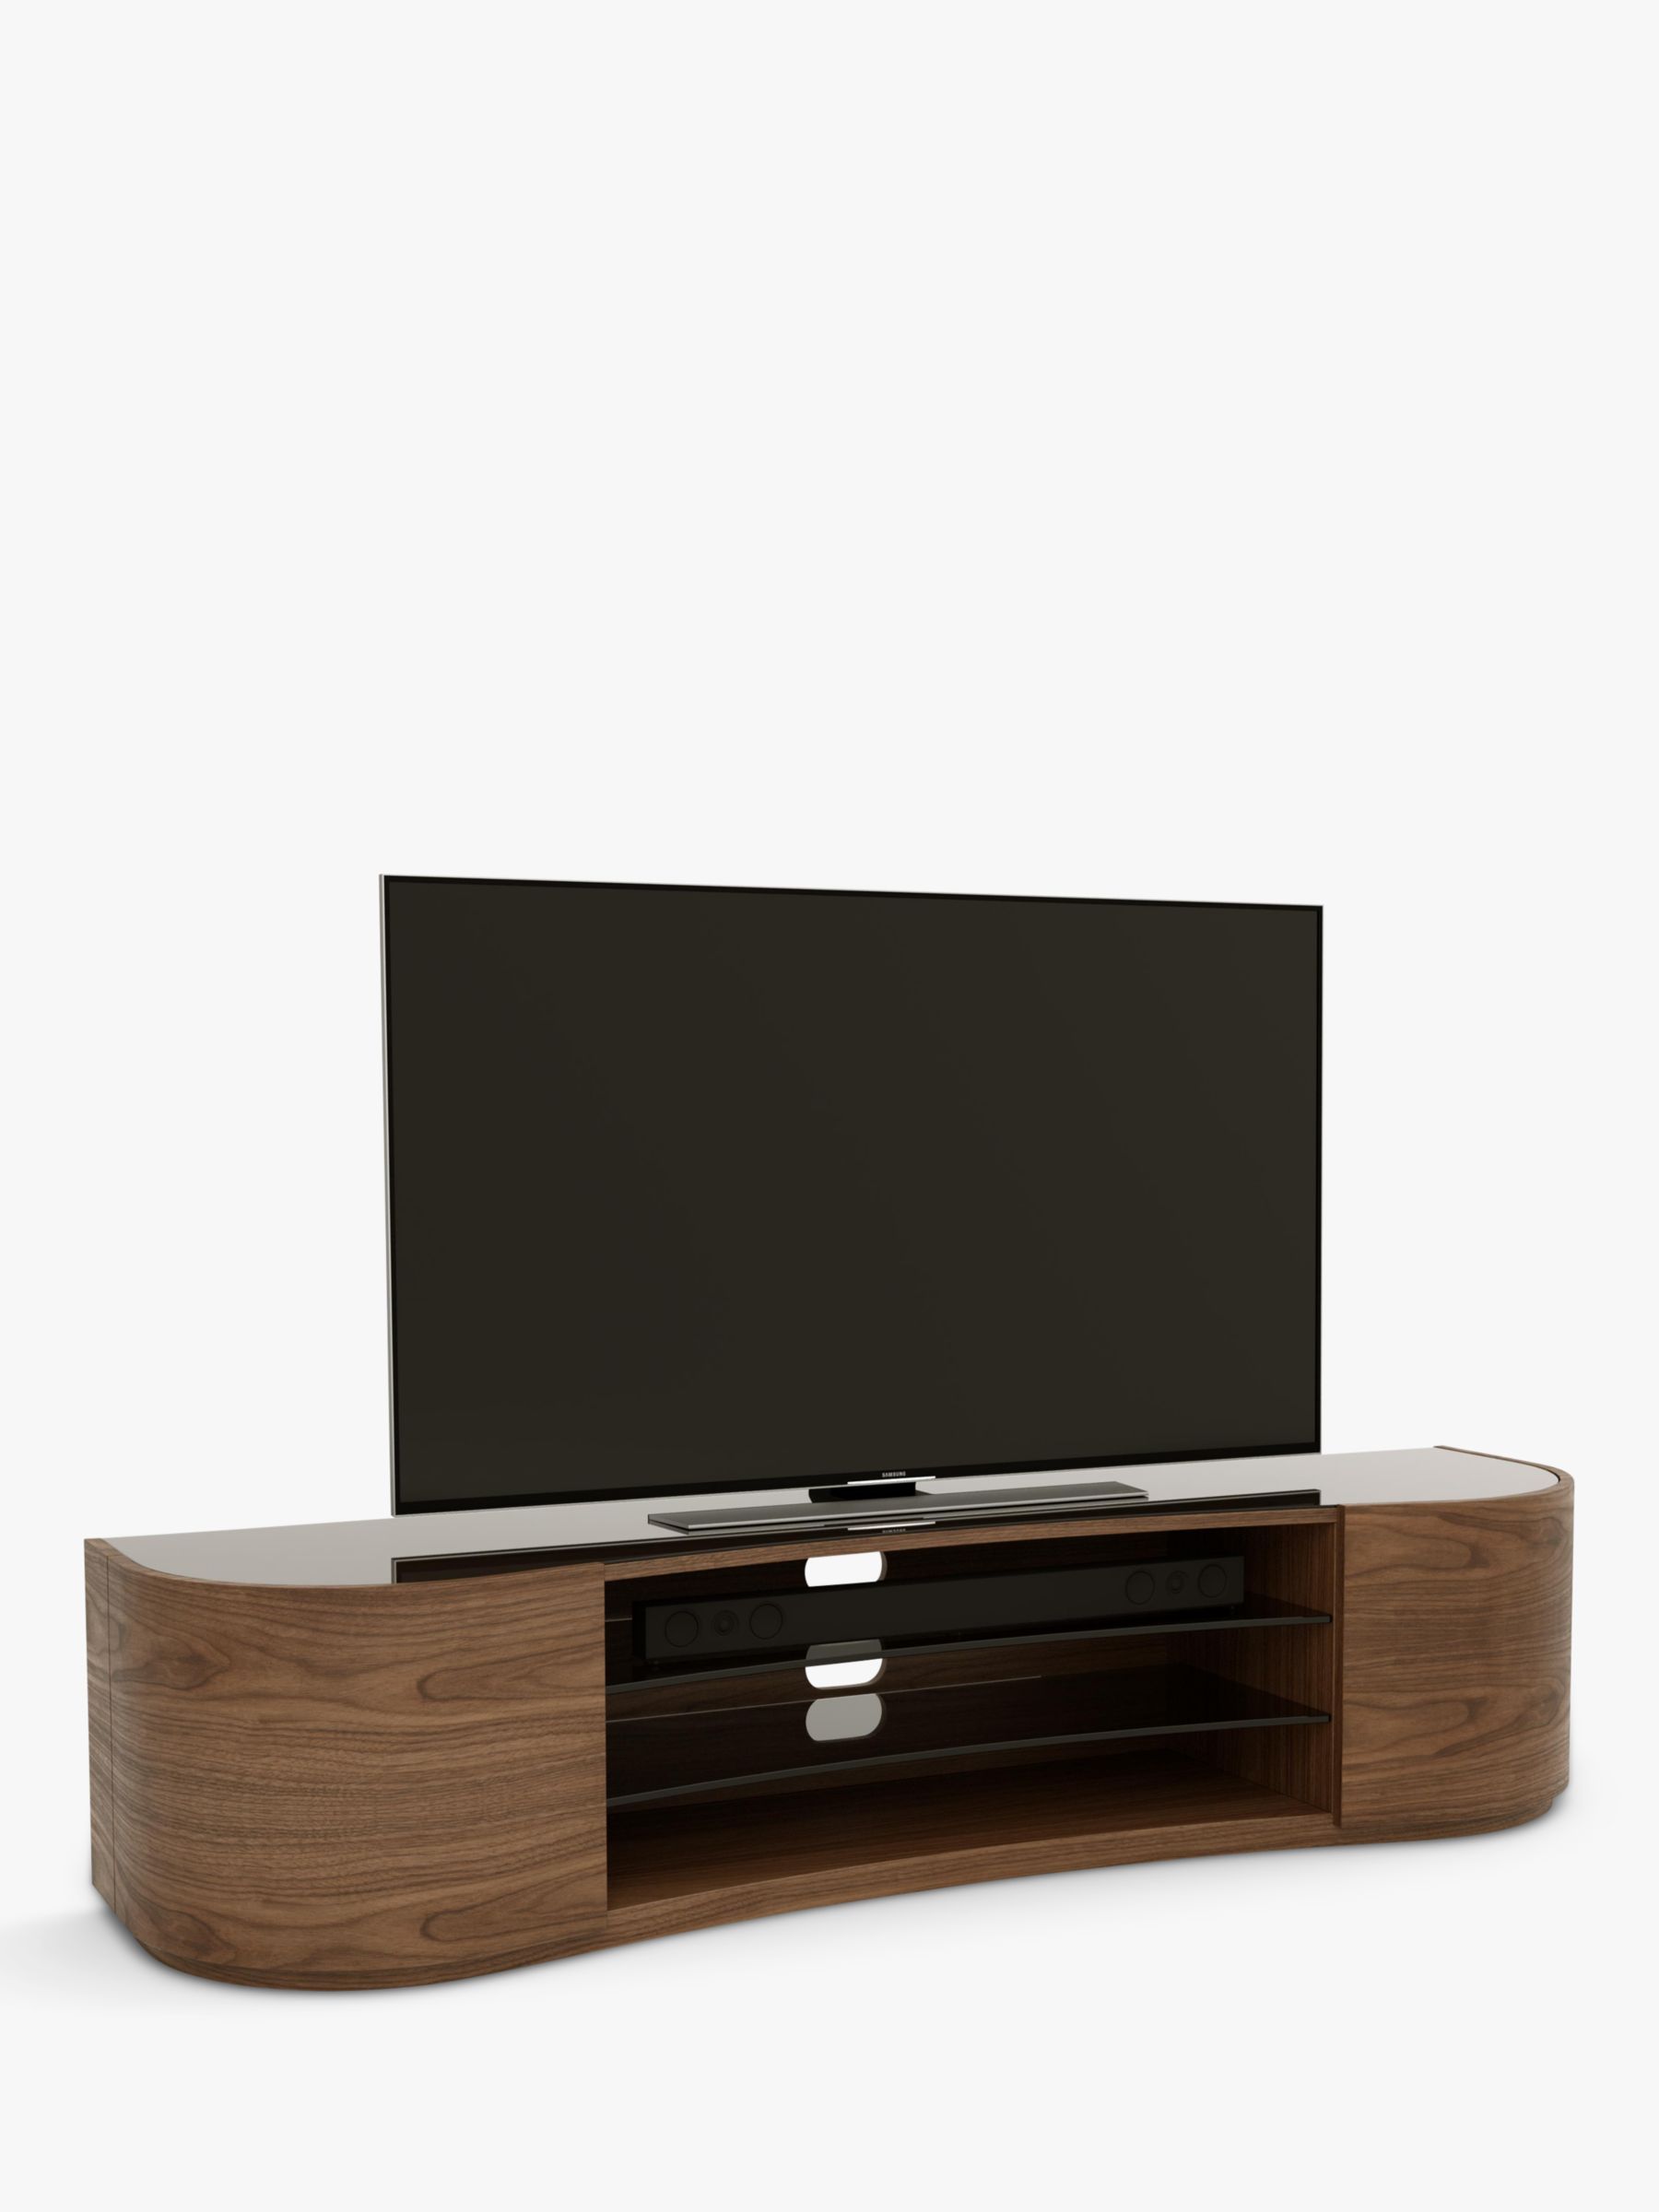 Photo of Tom schneider undulate 2000 tv stand for tvs up to 85